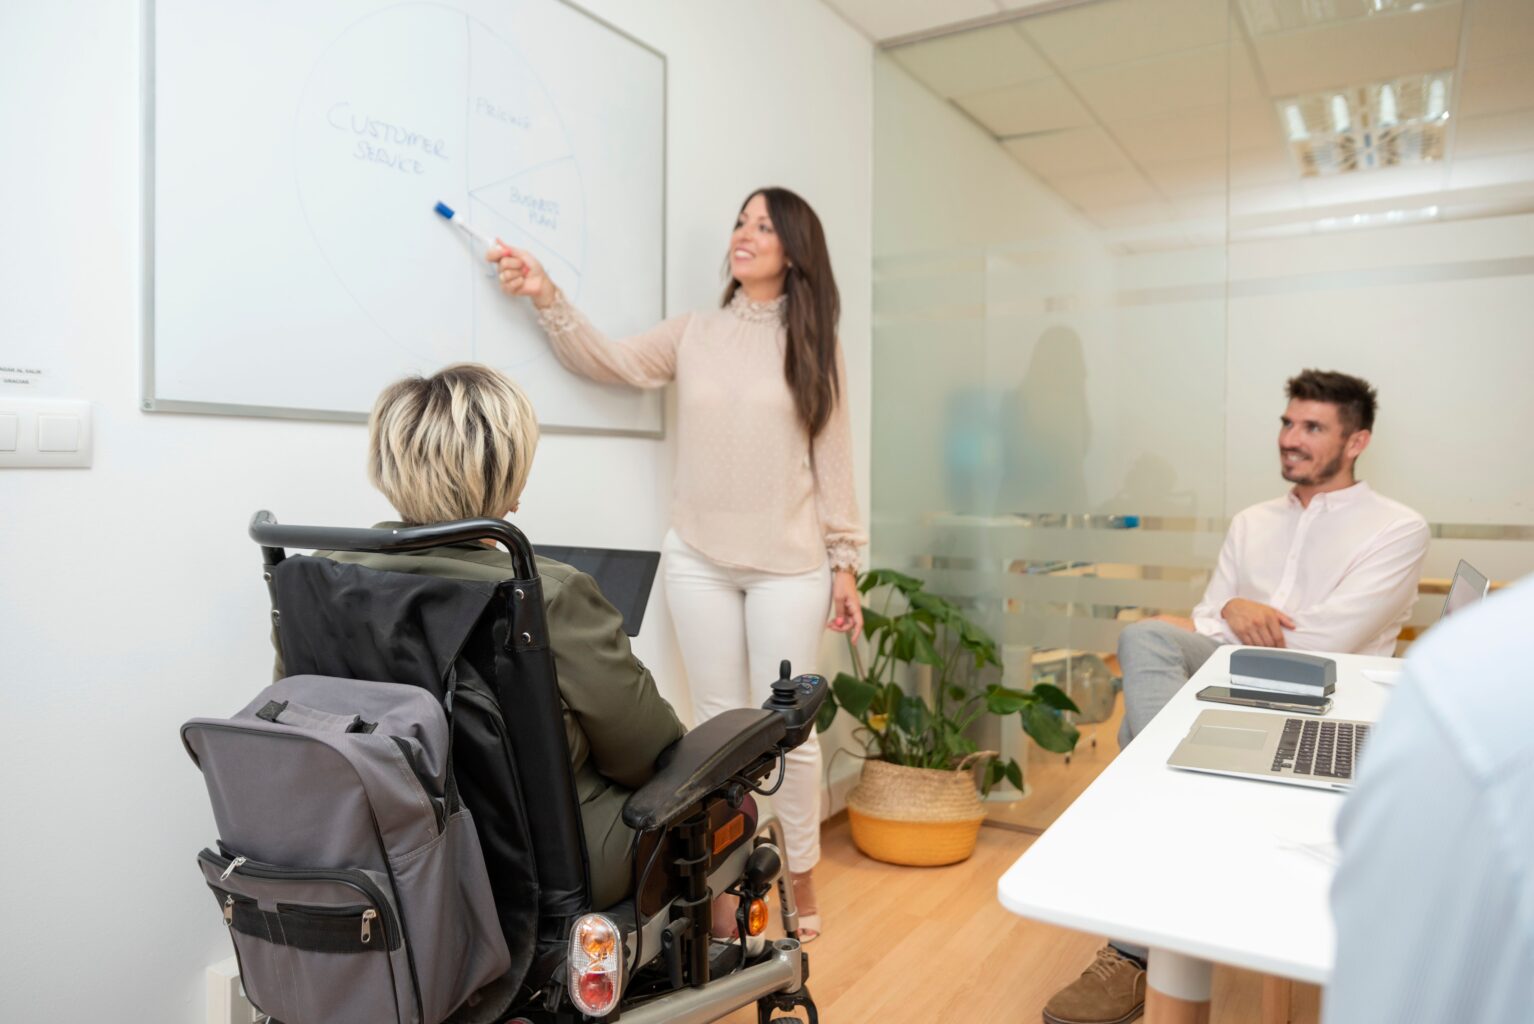 Setting of business meeting. Picture is of a woman using wheelchair looking at another woman pointing to something on a white board. 